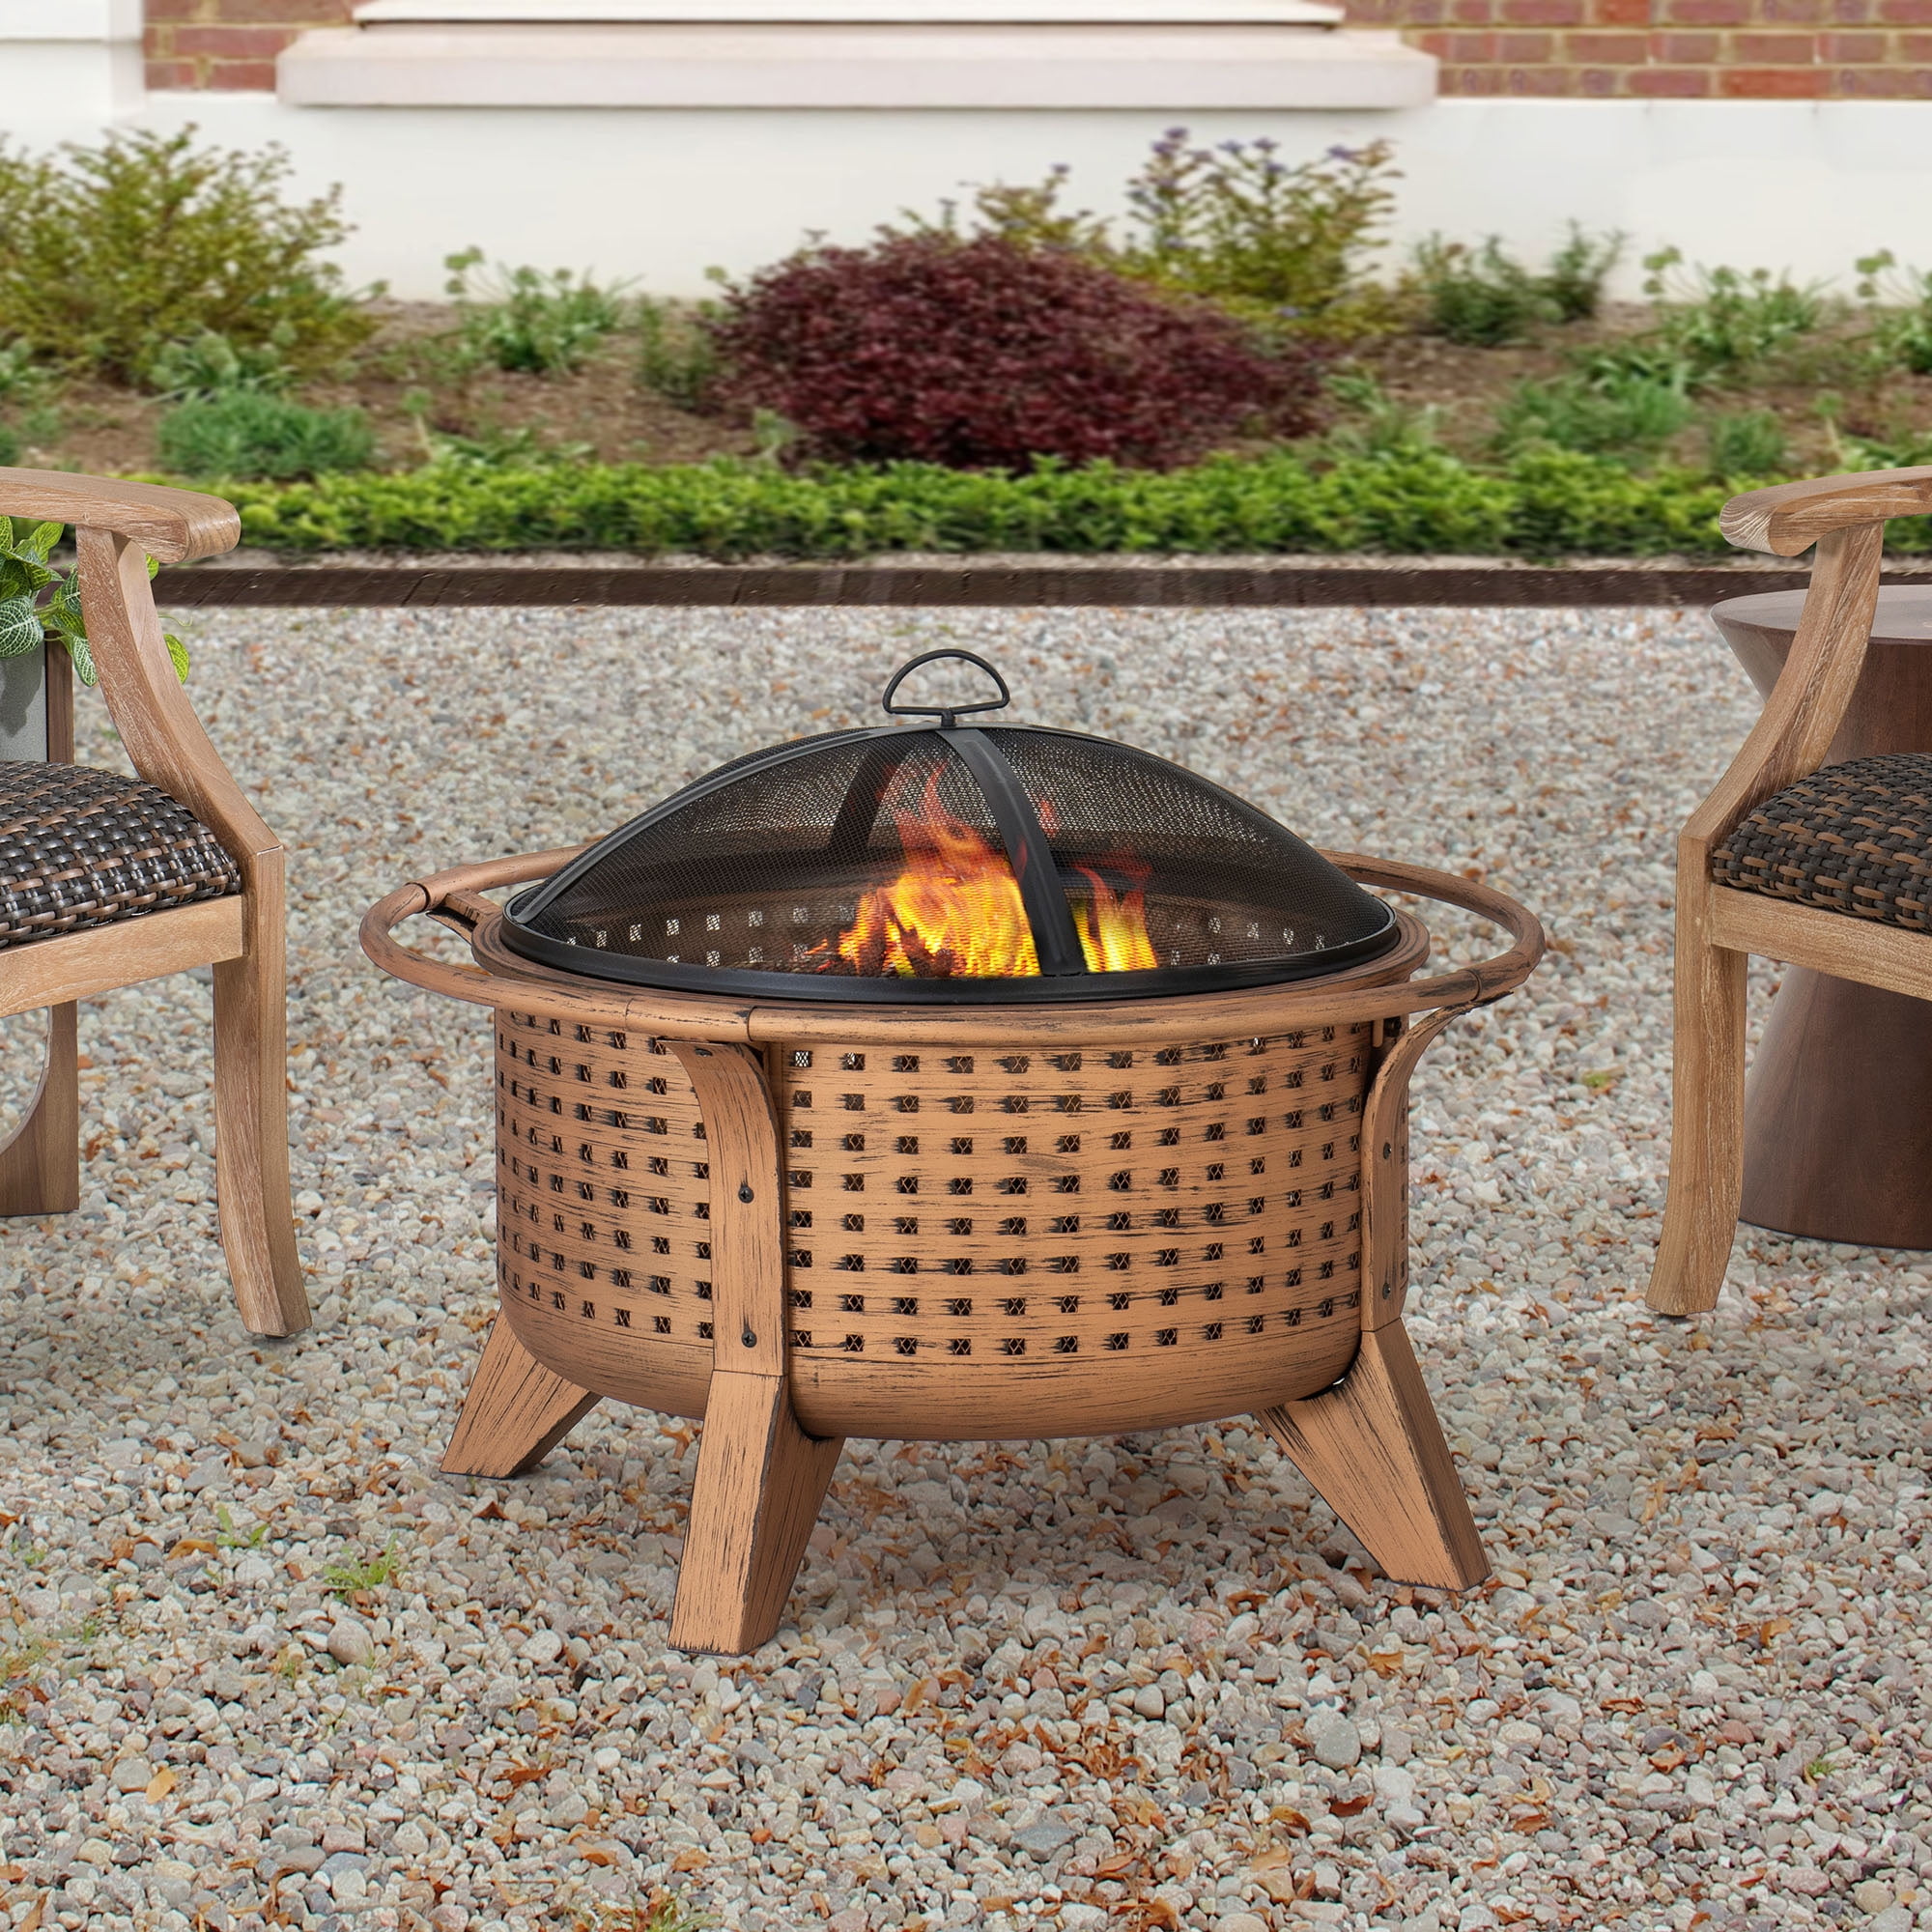 Sunjoy 30 Woven Round Wood Burning, Sunjoy Fire Pit Replacement Parts